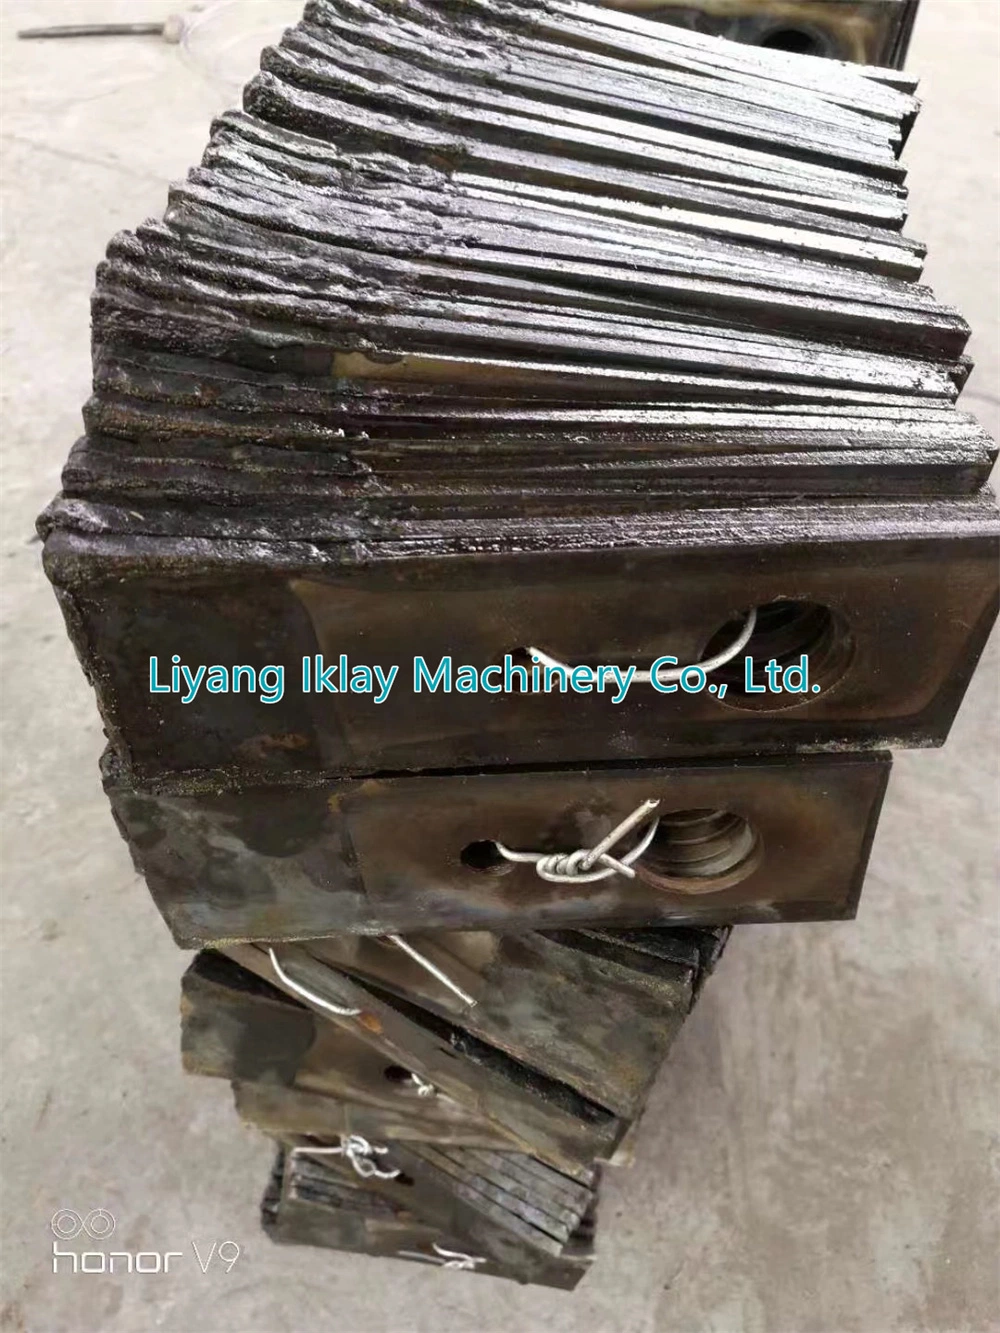 High Quality Hammer Blades for Hammer Mill / Hammer Mill Spart Parts